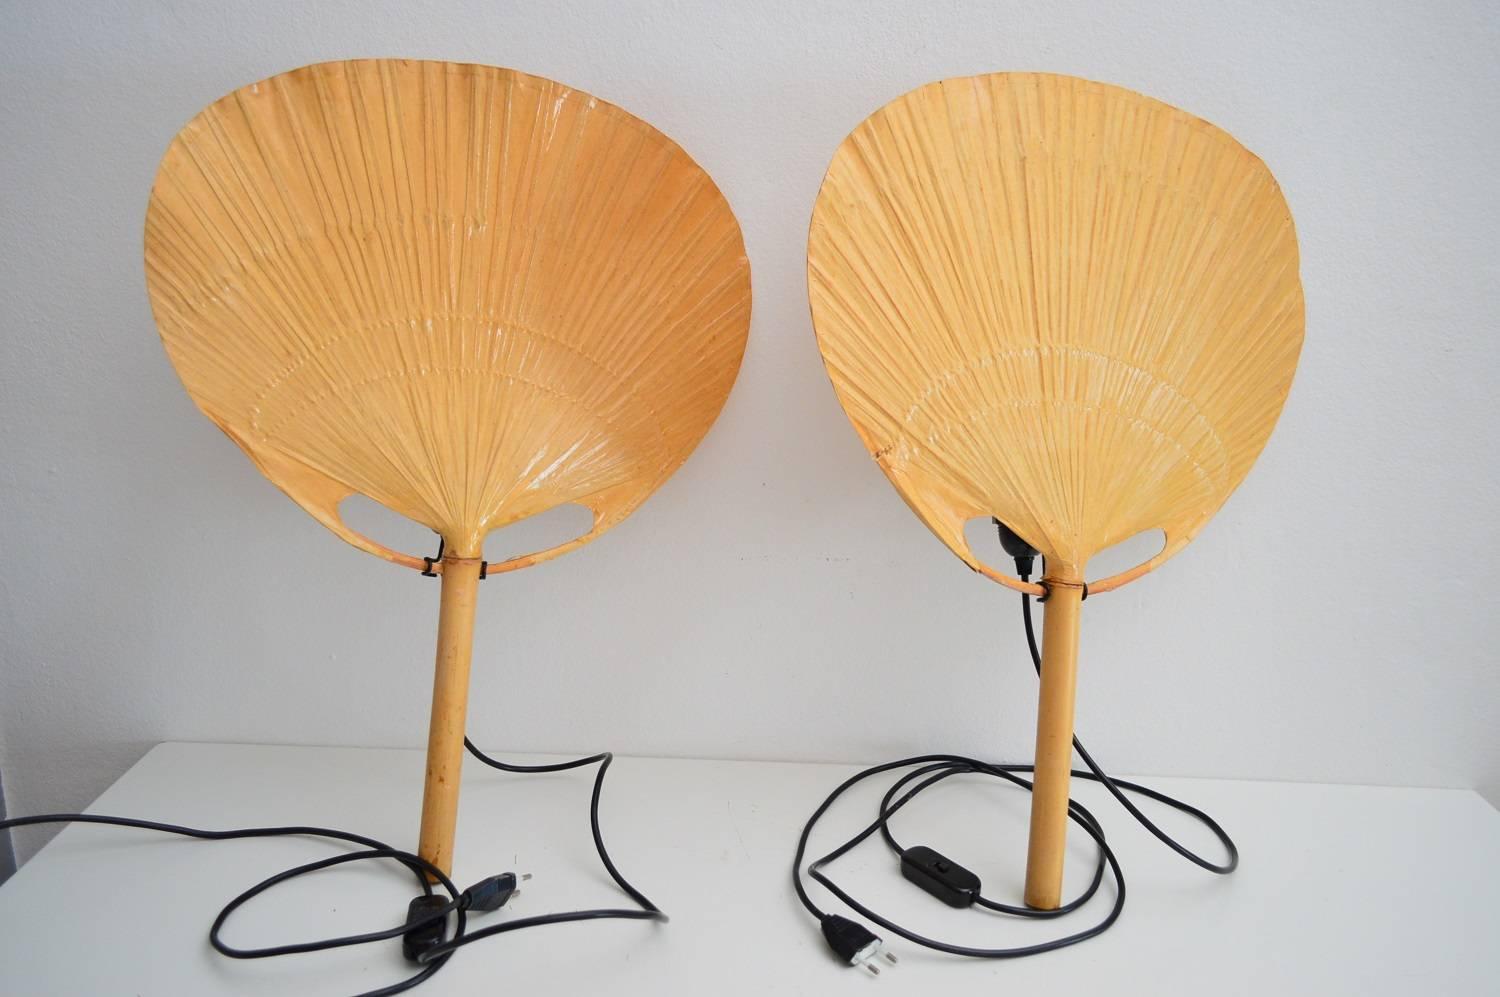 Hand-Crafted Uchiwa Wall Sconce by Ingo Maurer, 1973, Set of Two